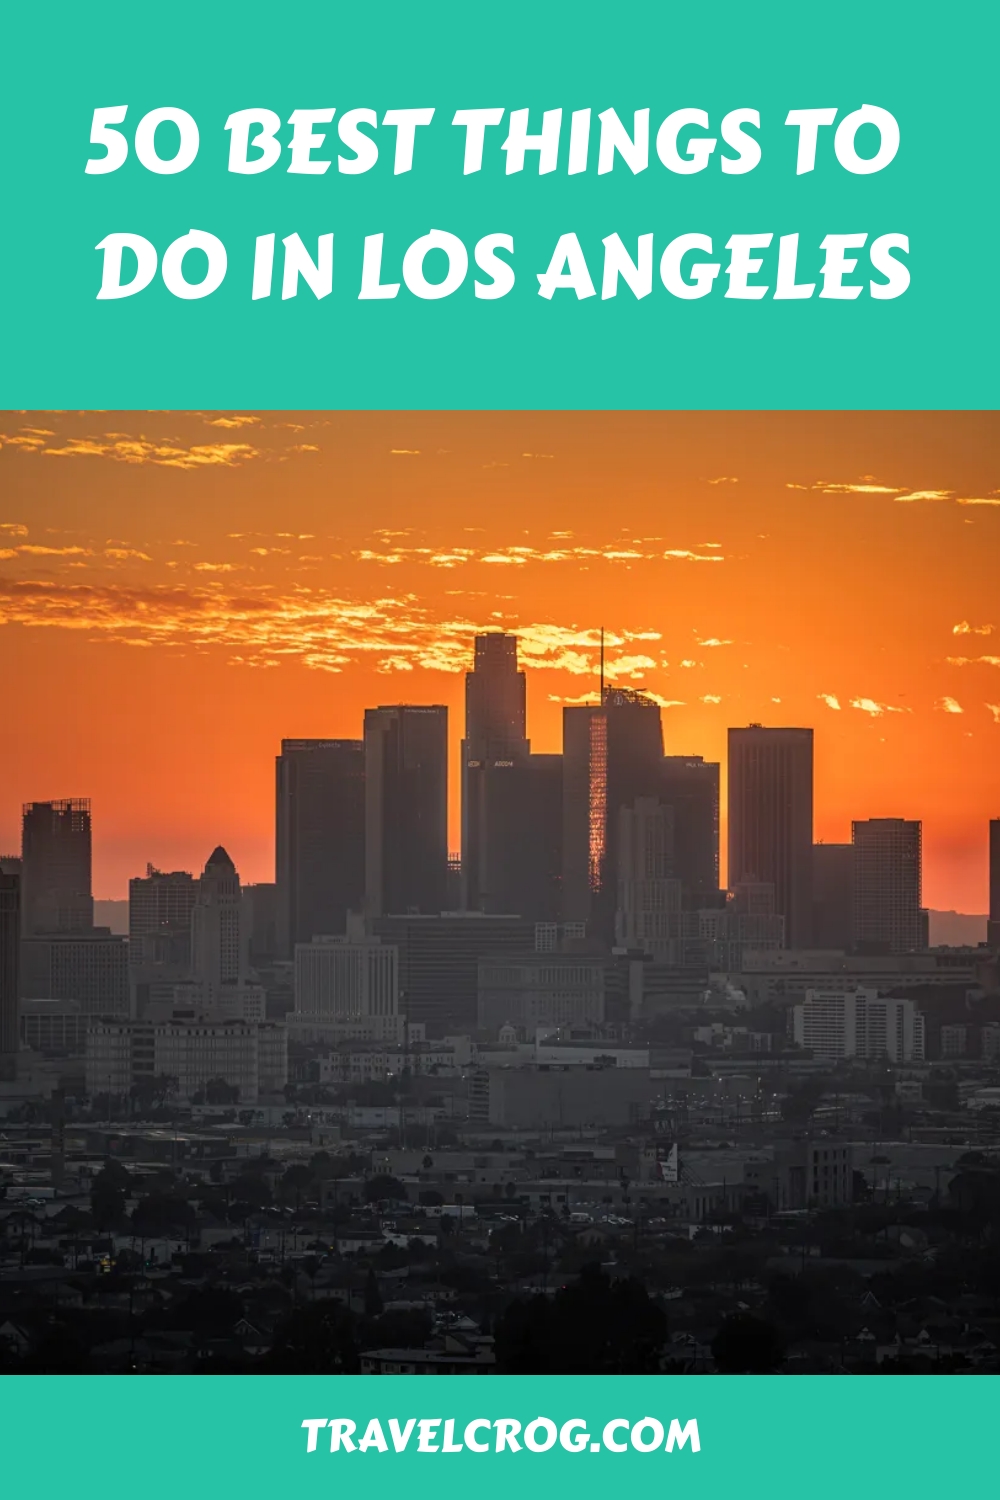 50 Best Things to do in Los Angeles generated pin 12166